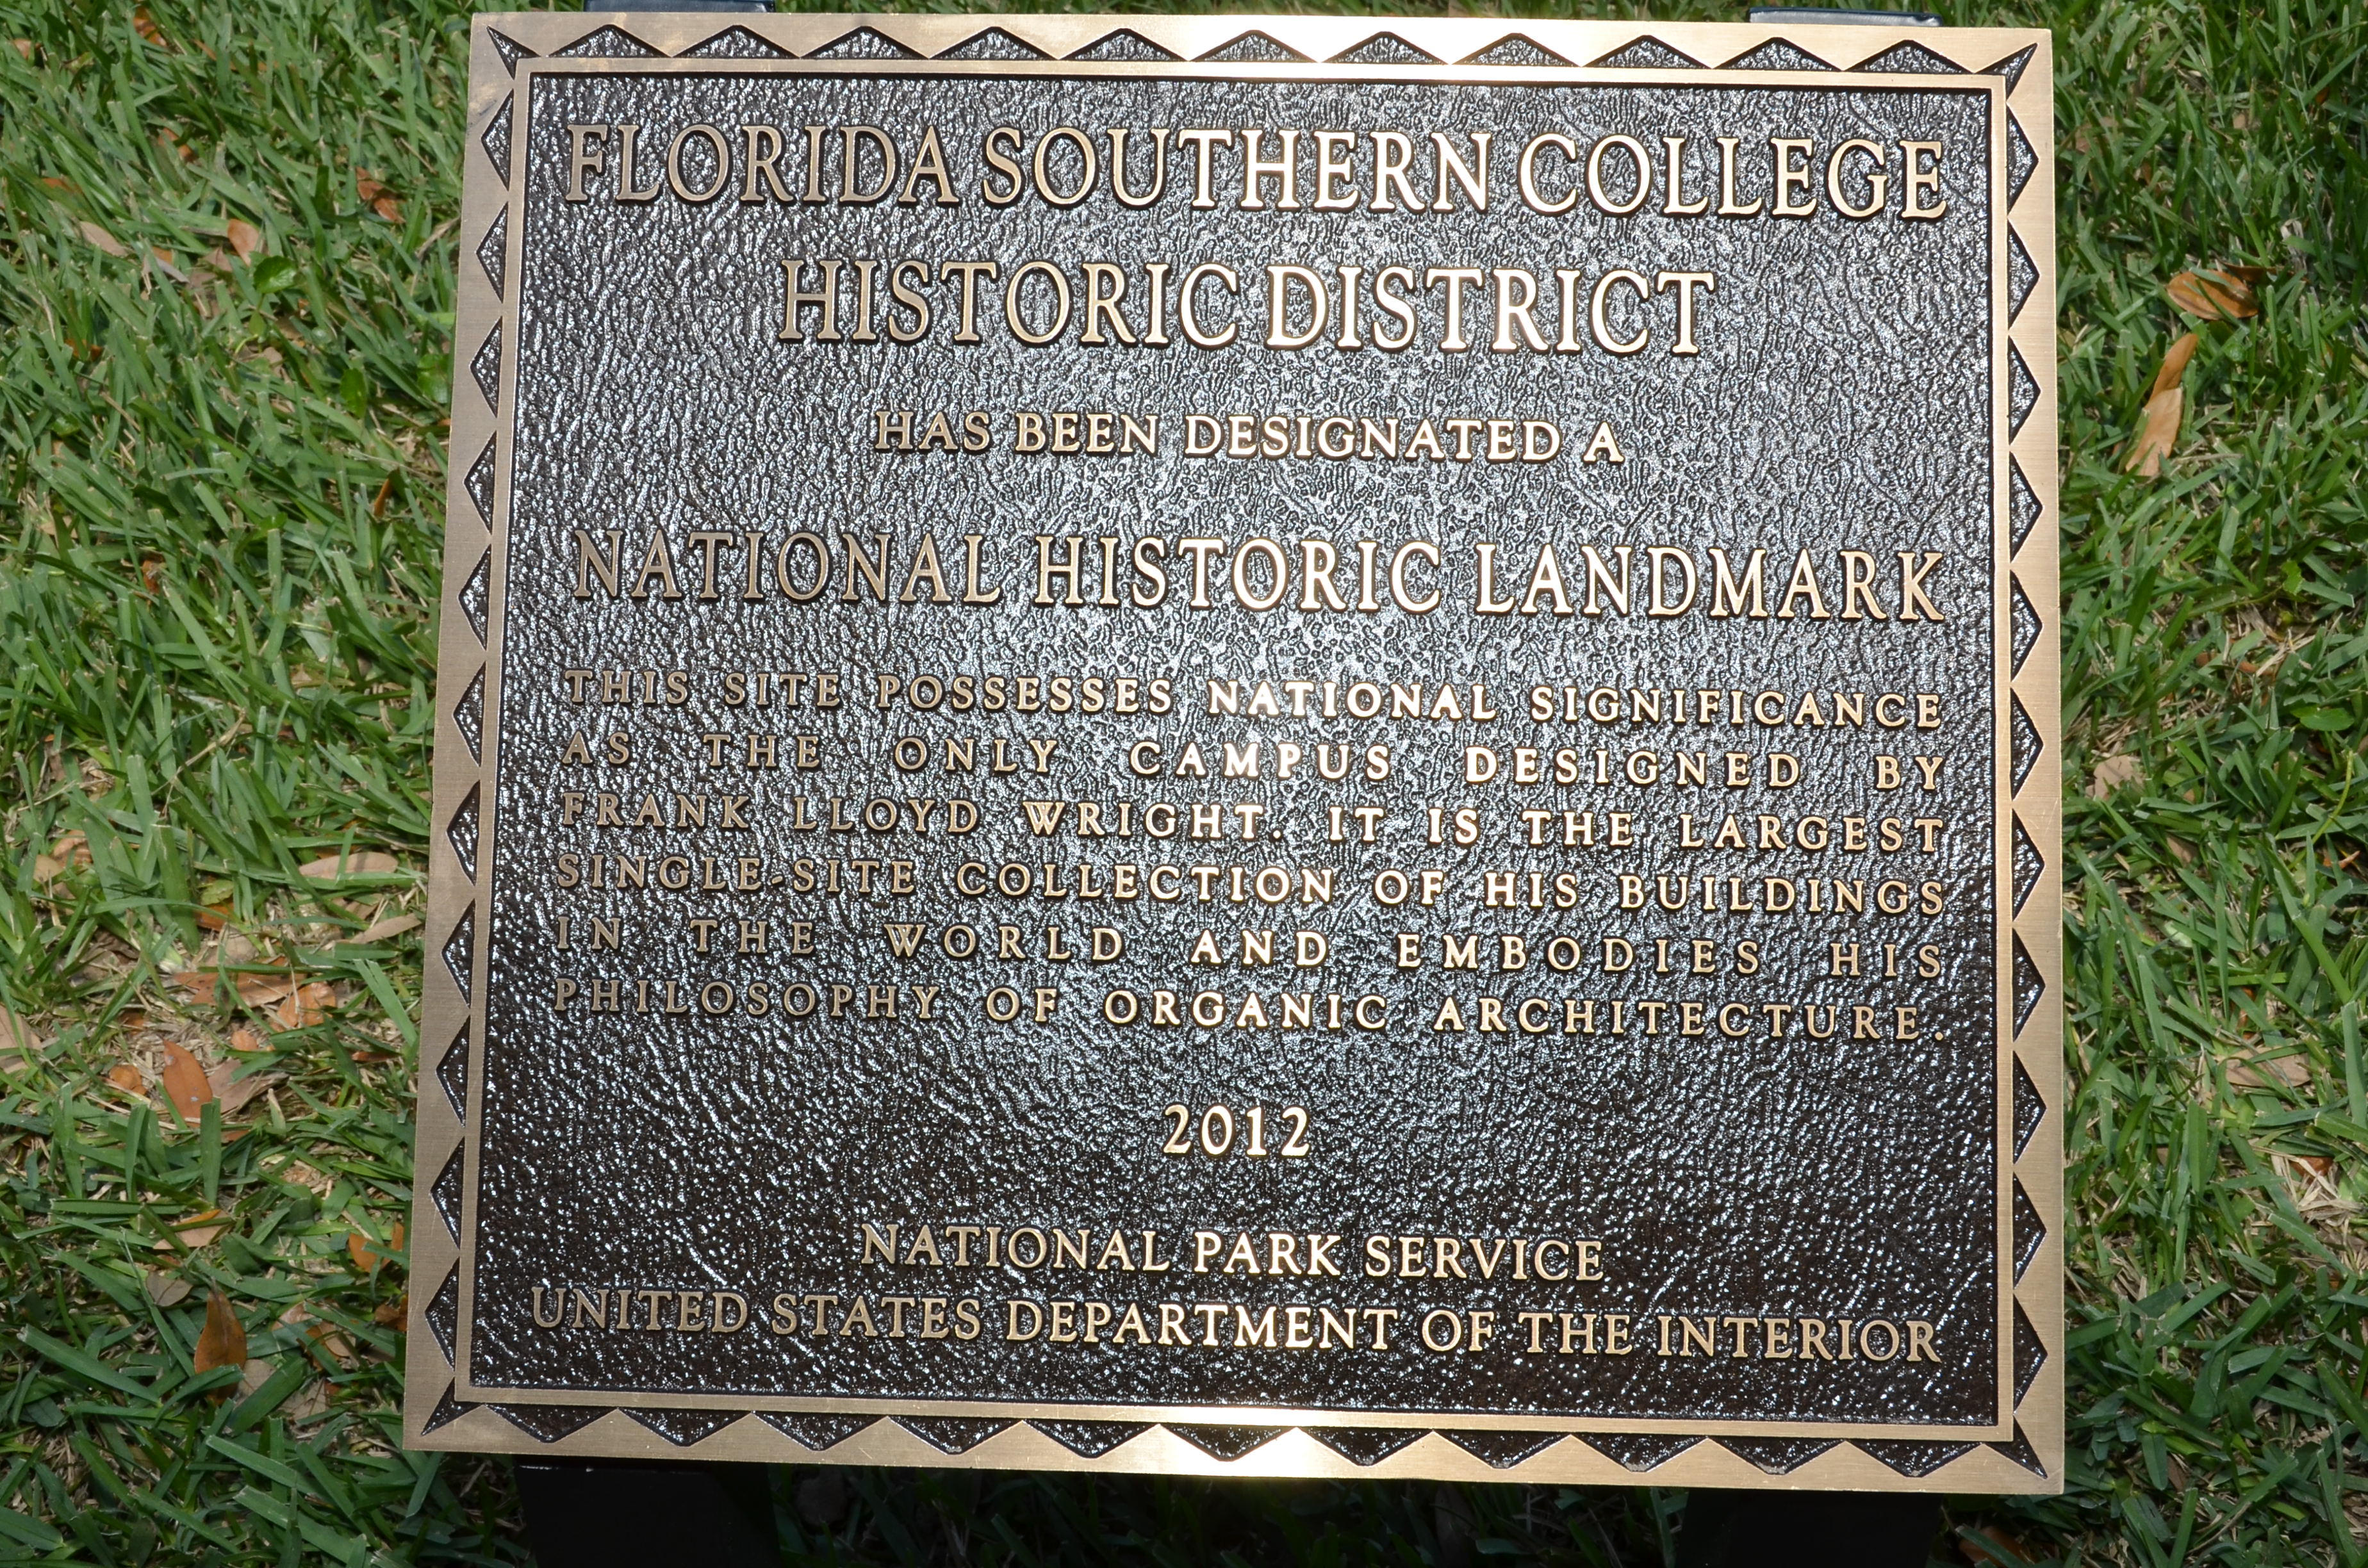 Florida Southern College Historic District has been designated a National Historic Landmark. This site possesses national significance as the only campus designed by Frank Lloyd Wright. It is the largest single-site collection of his buildings in the world and embodies his philosophy of organic architecture. 2012. National Park Service. United States Department of the Interior.